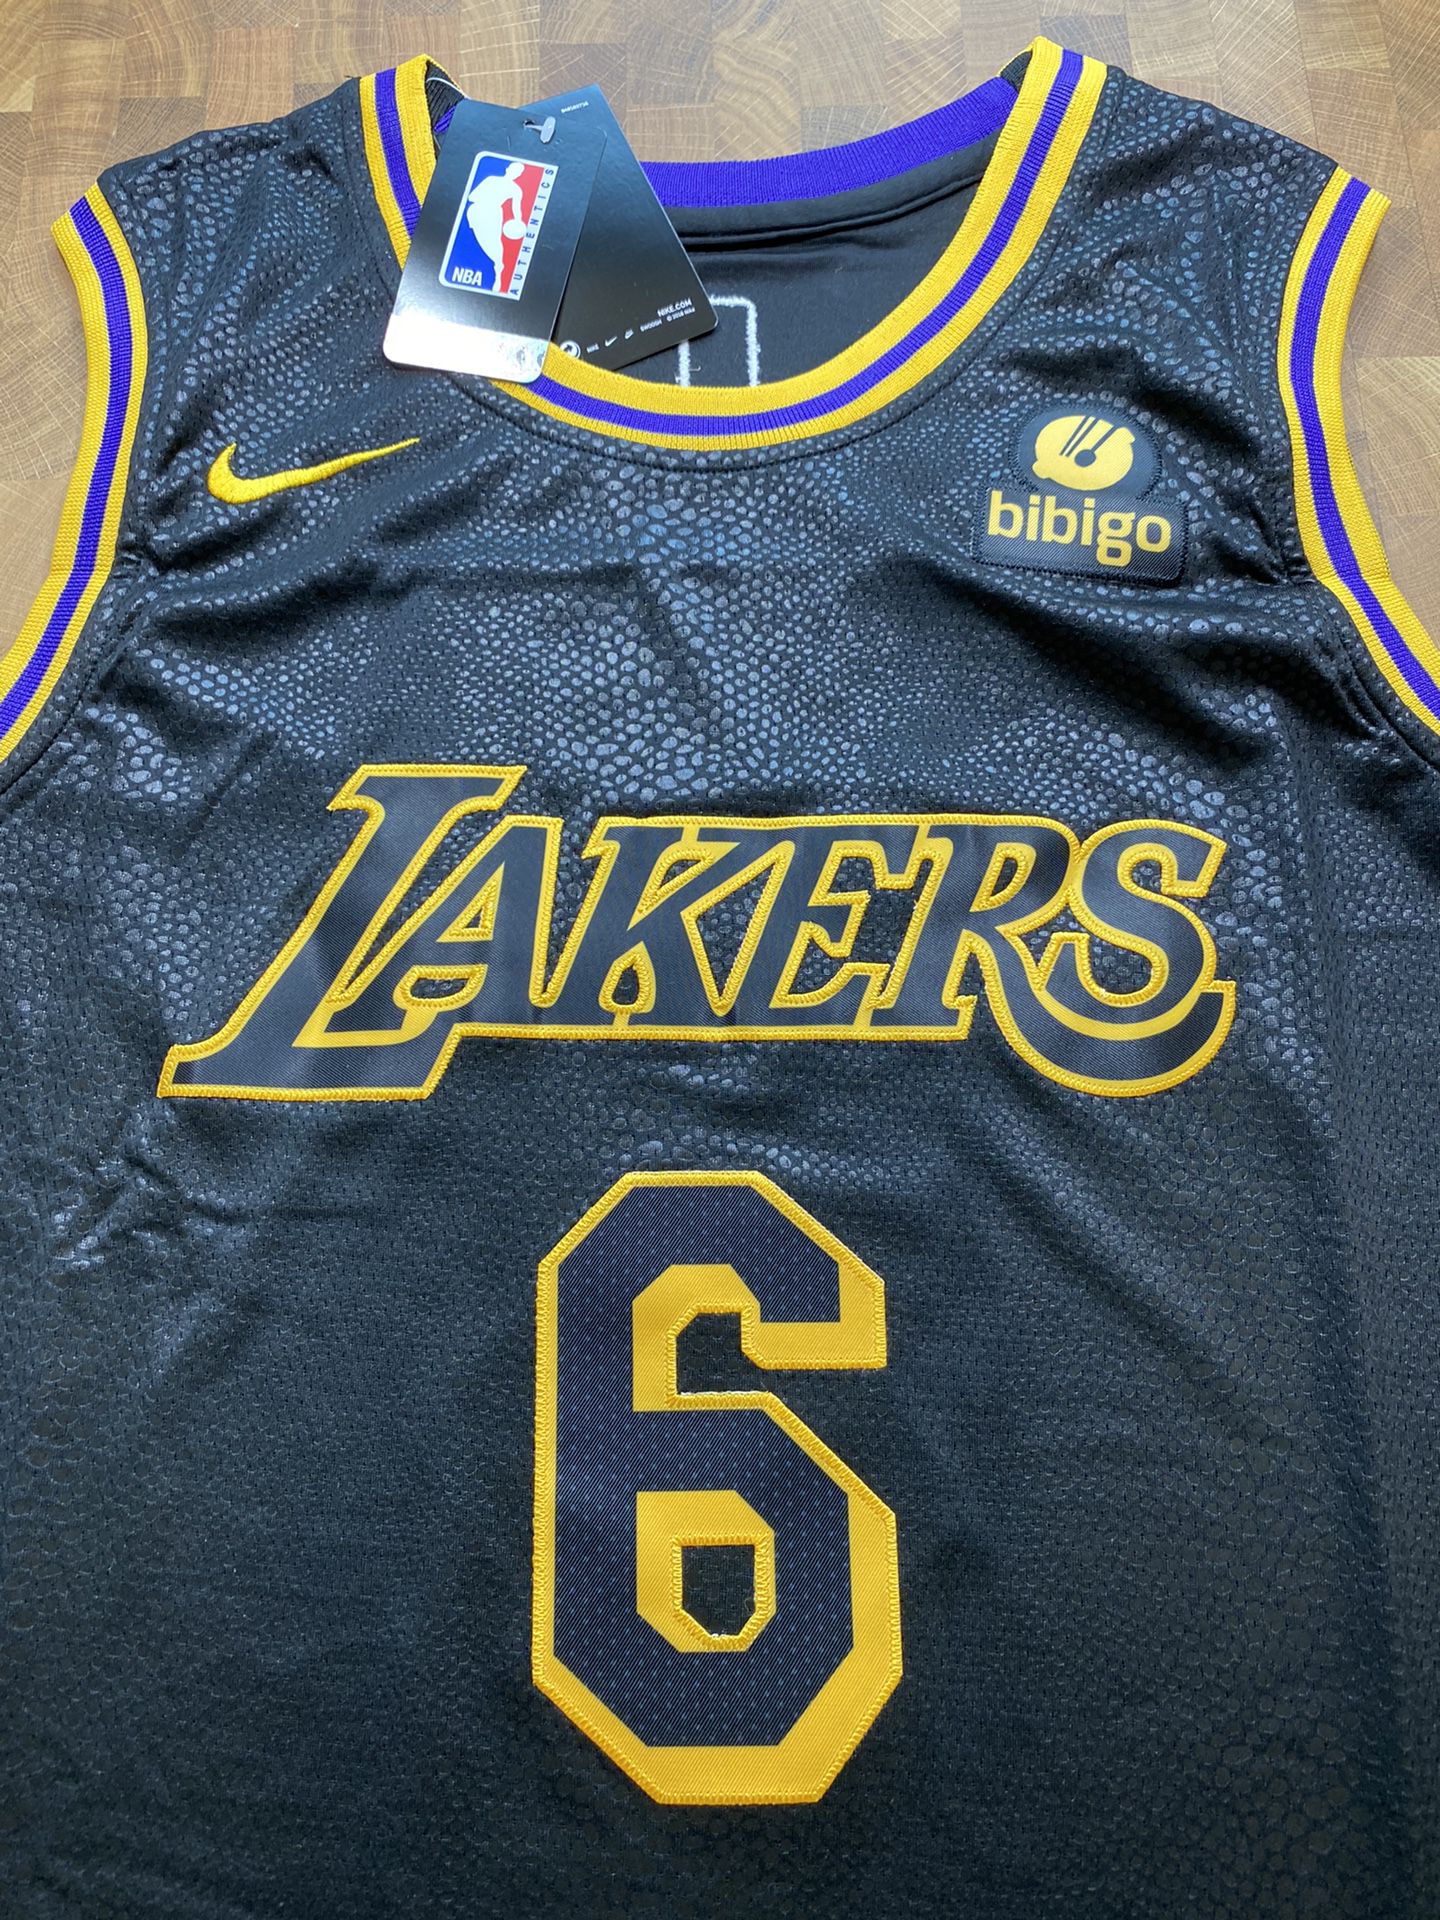 LeBron James Lakers Jersey for Sale in San Jose, CA - OfferUp